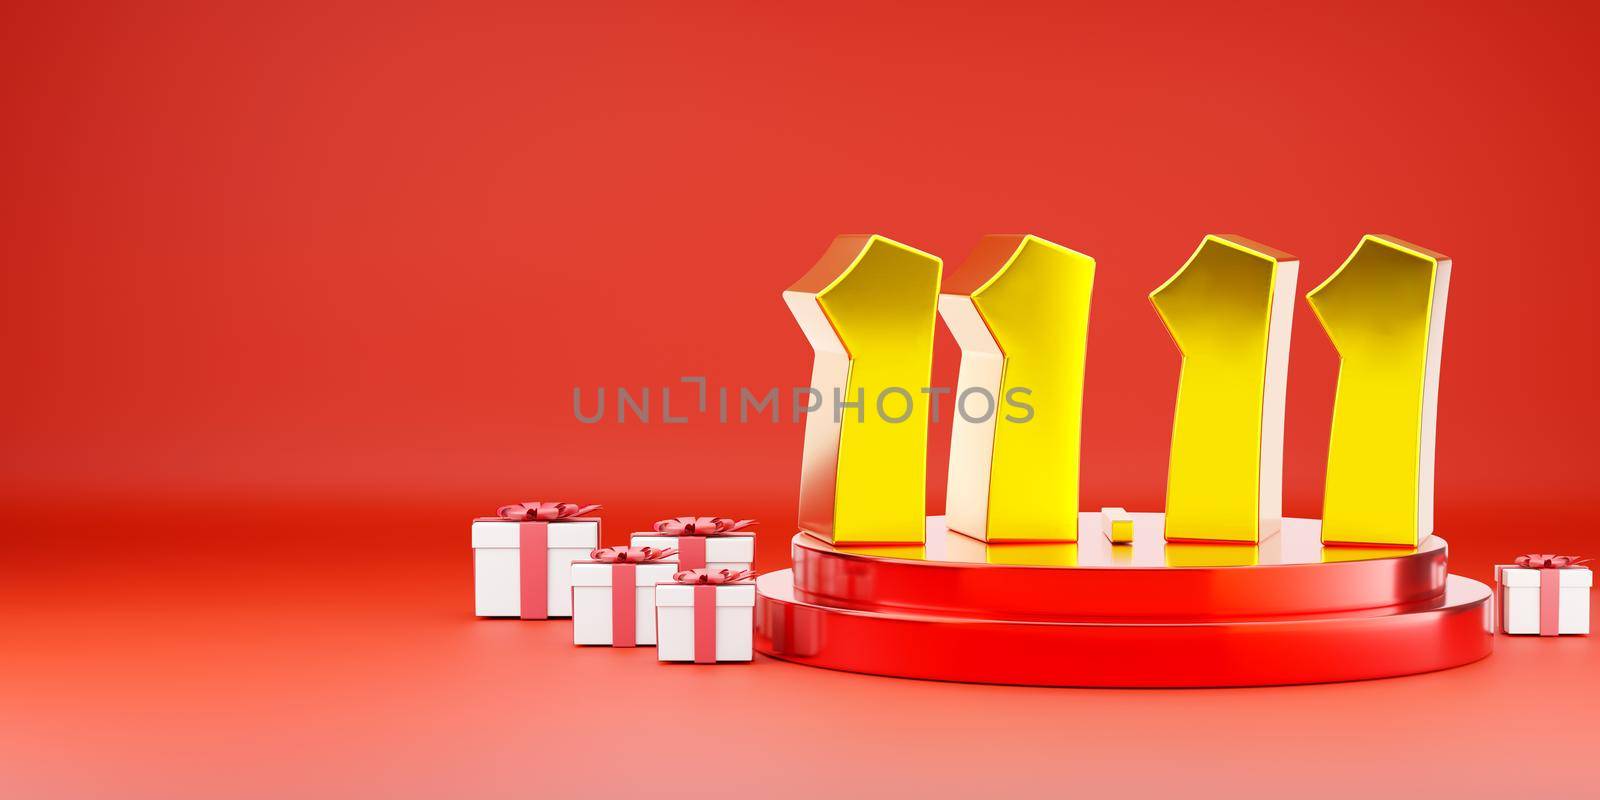 11.11 Single day sale. Banner 11 number on podium scene with gift box on red background by Sorapop